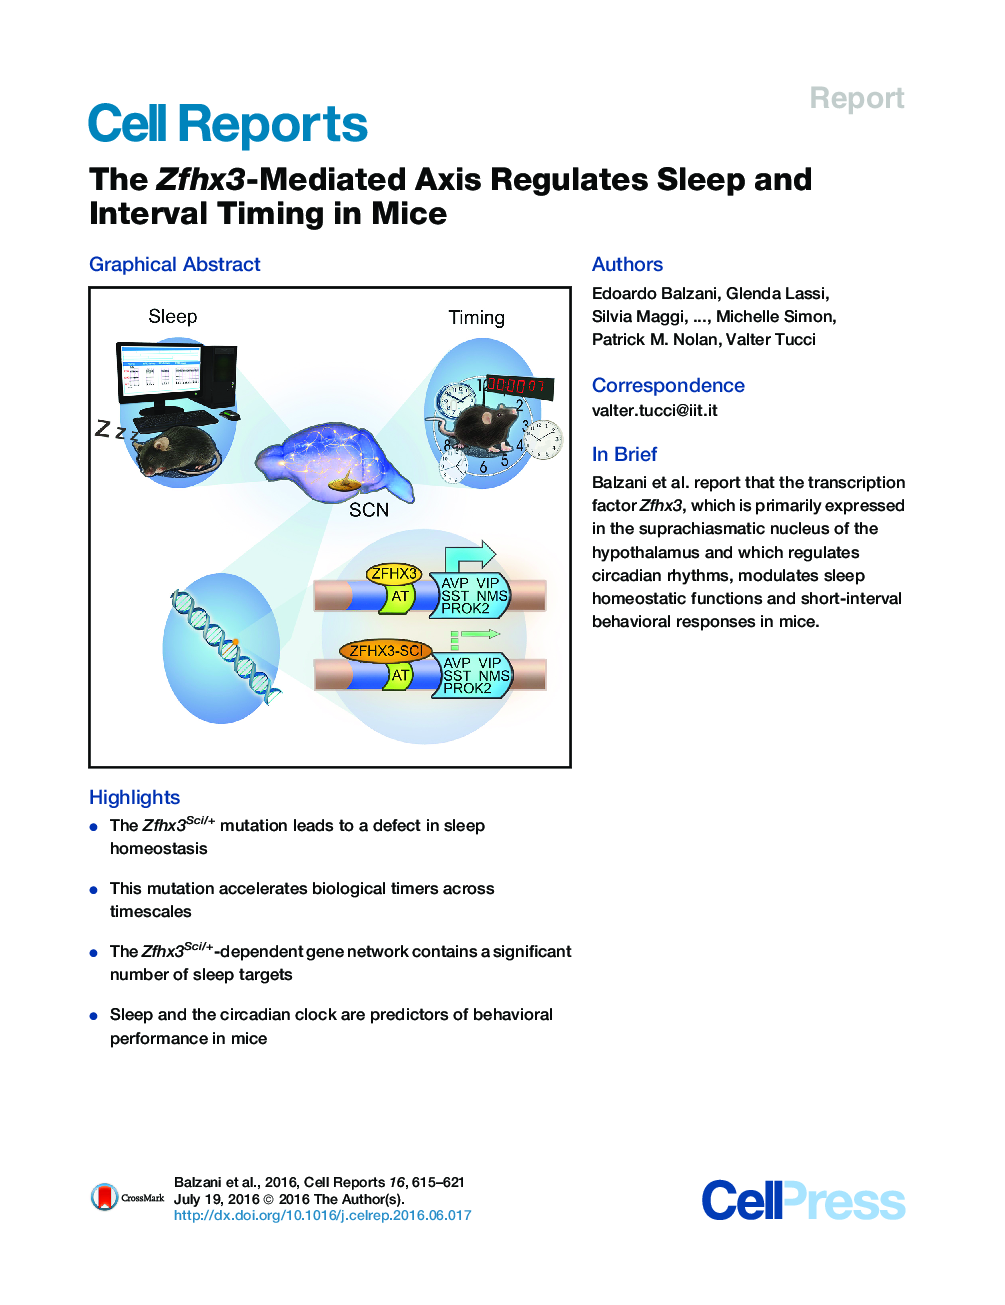 The Zfhx3-Mediated Axis Regulates Sleep and Interval Timing in Mice